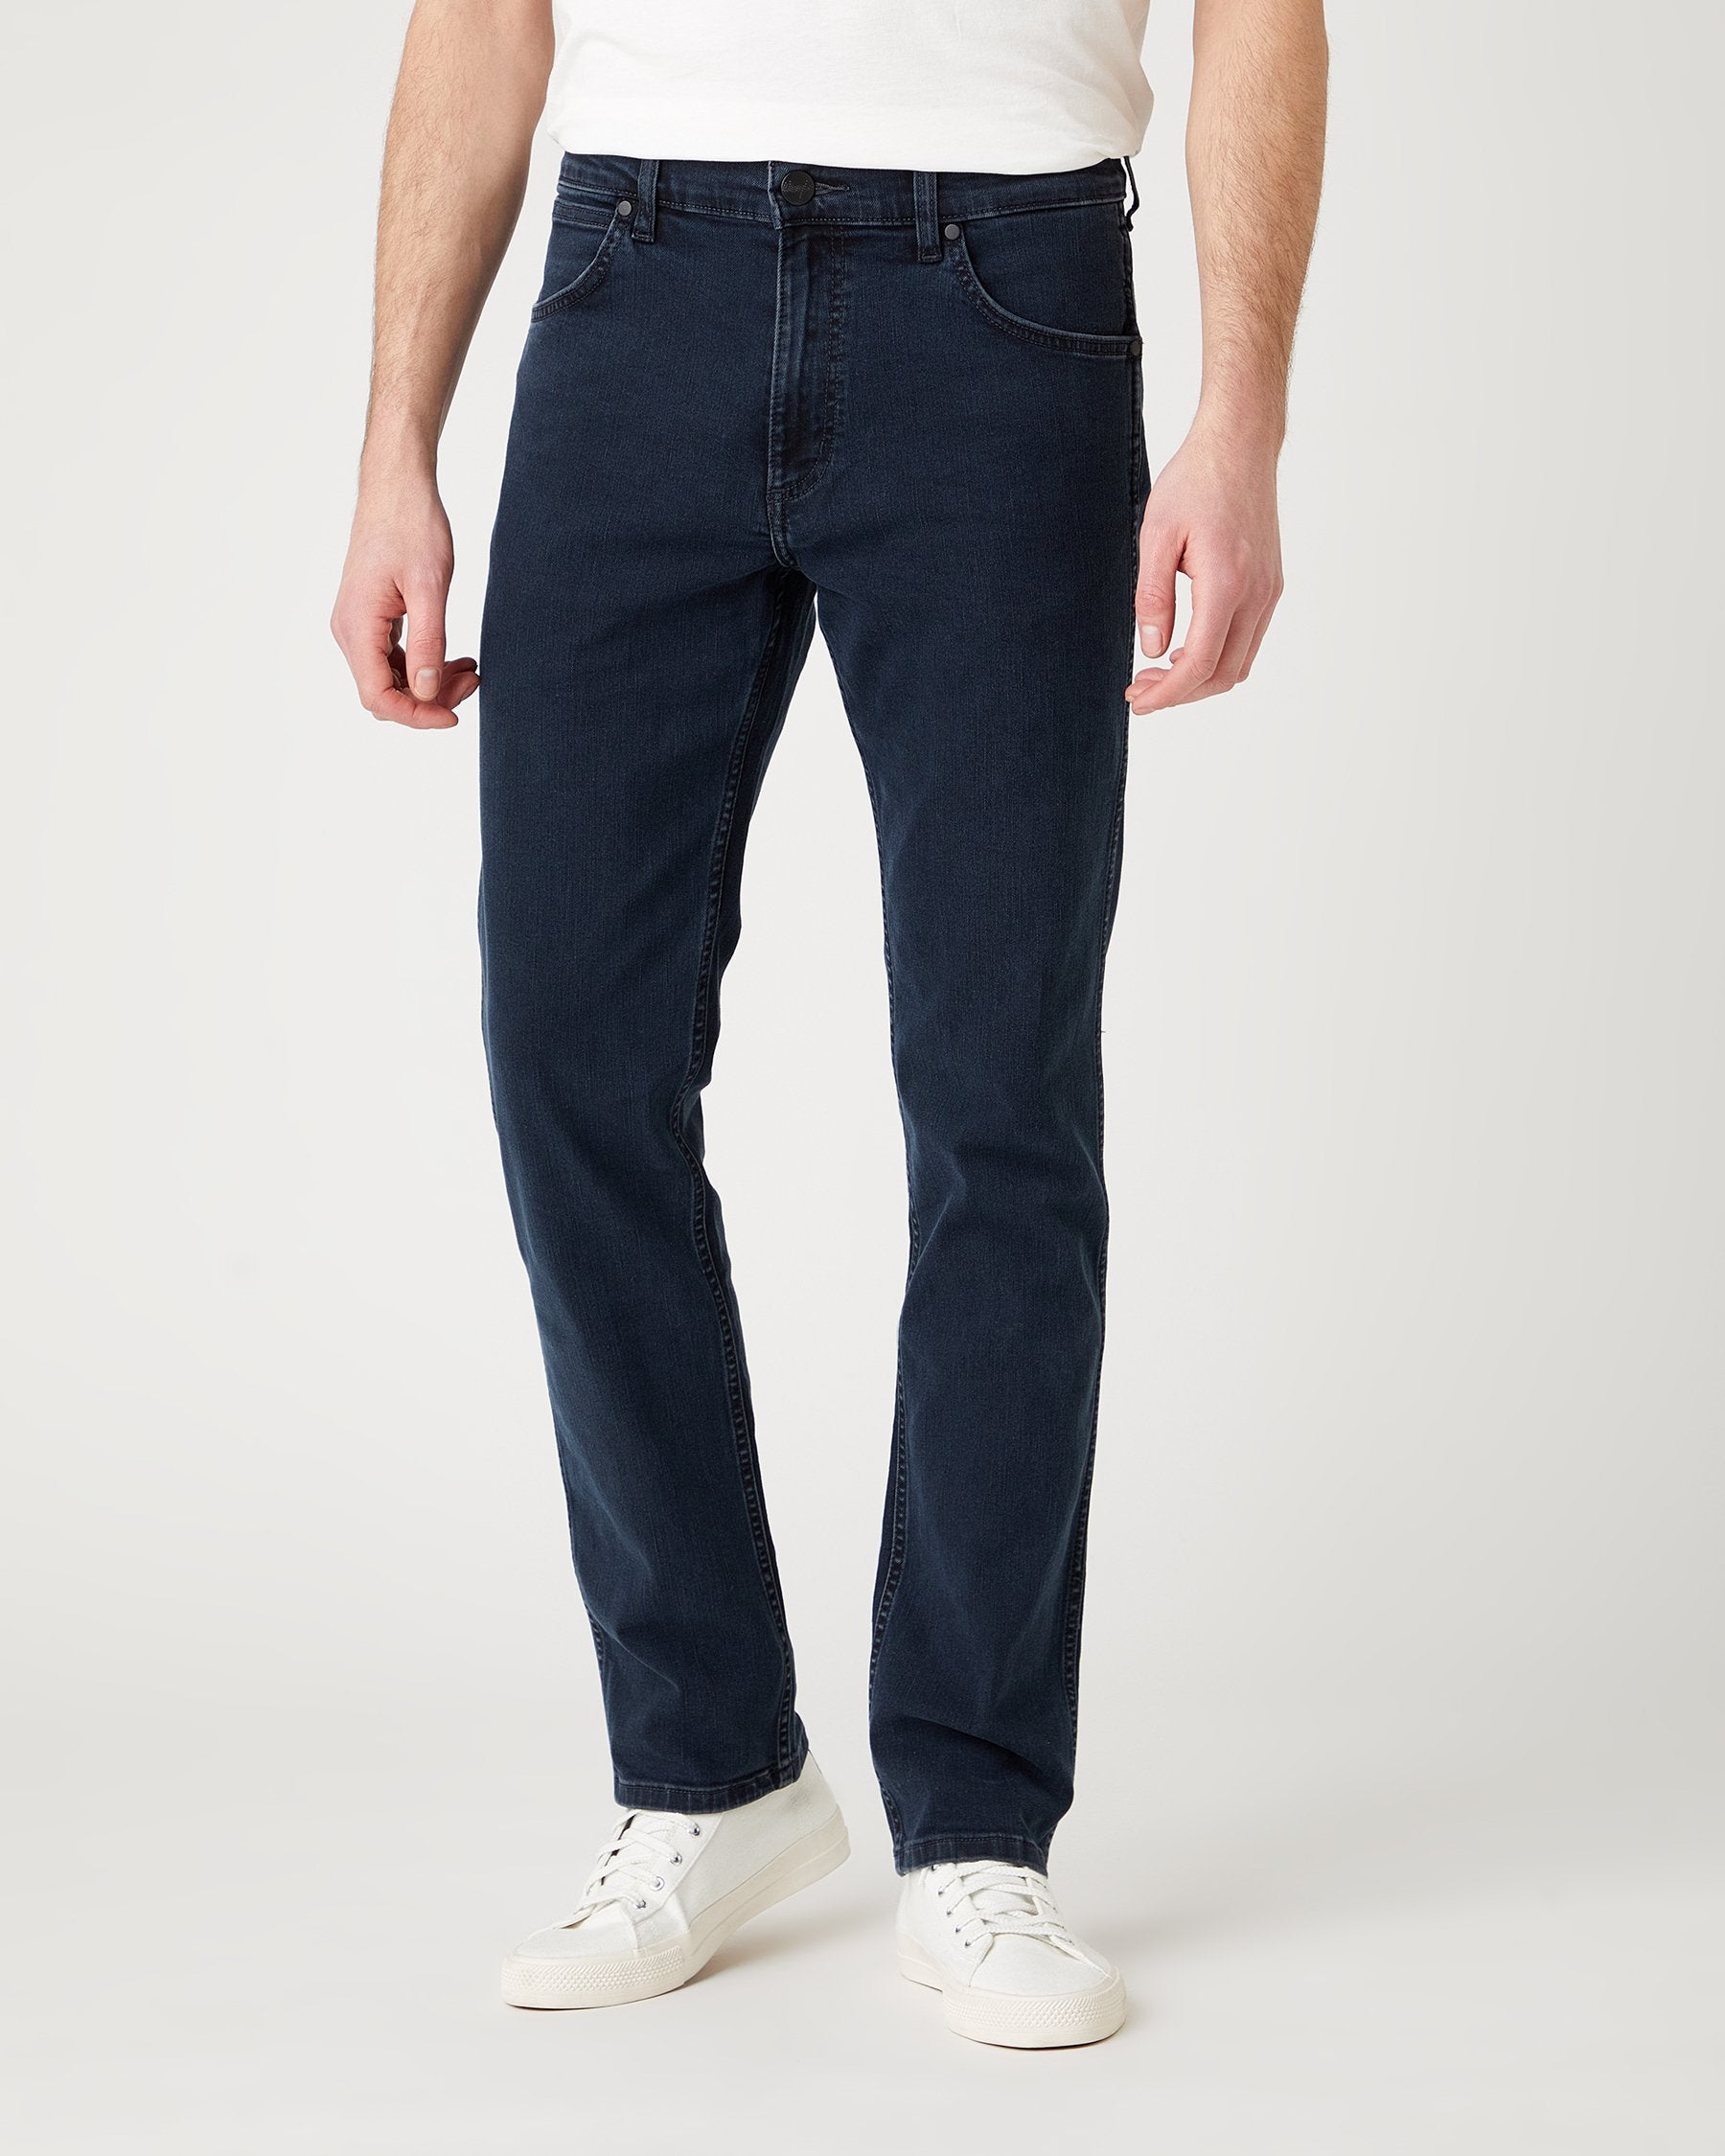 Levis 501 Original Regular Fit Mens Jeans - Marlon - Jeans and Street  Fashion from Jeanstore